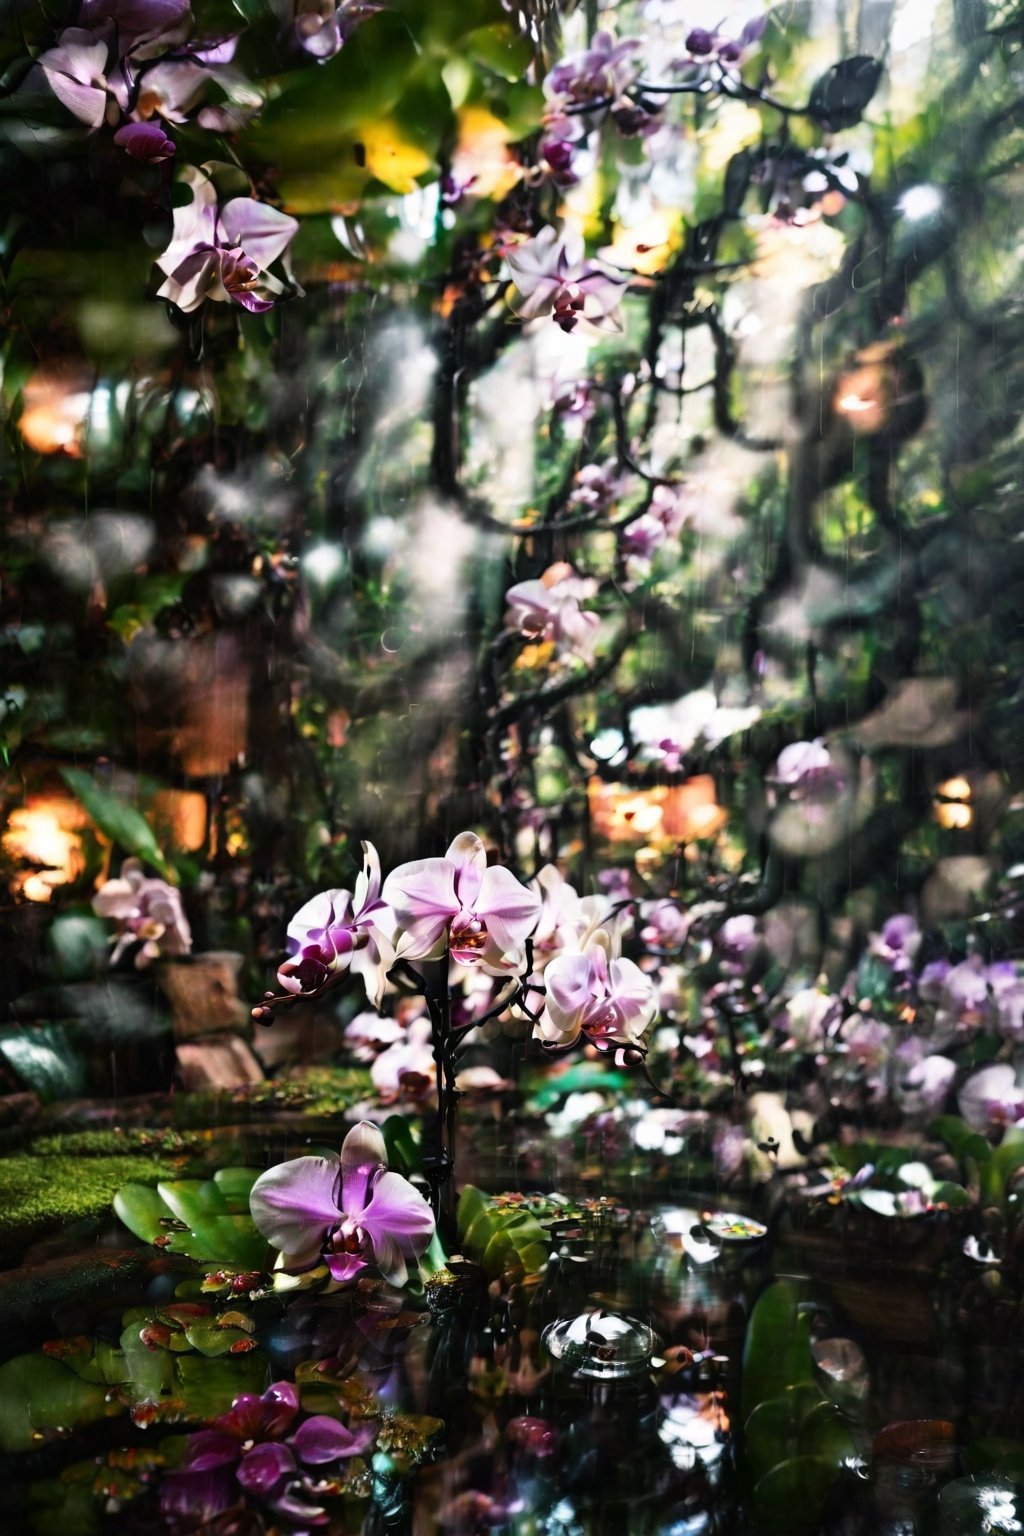 nature background, landscape, distortion, blur, meme, dreamcore, desaturation , brightness, chromatic distortion,analog photography, camera lens distortion, fantastic, daydream, liminal spaces, dreams, realistic nature, analog record, orchids, rain forest, cursed